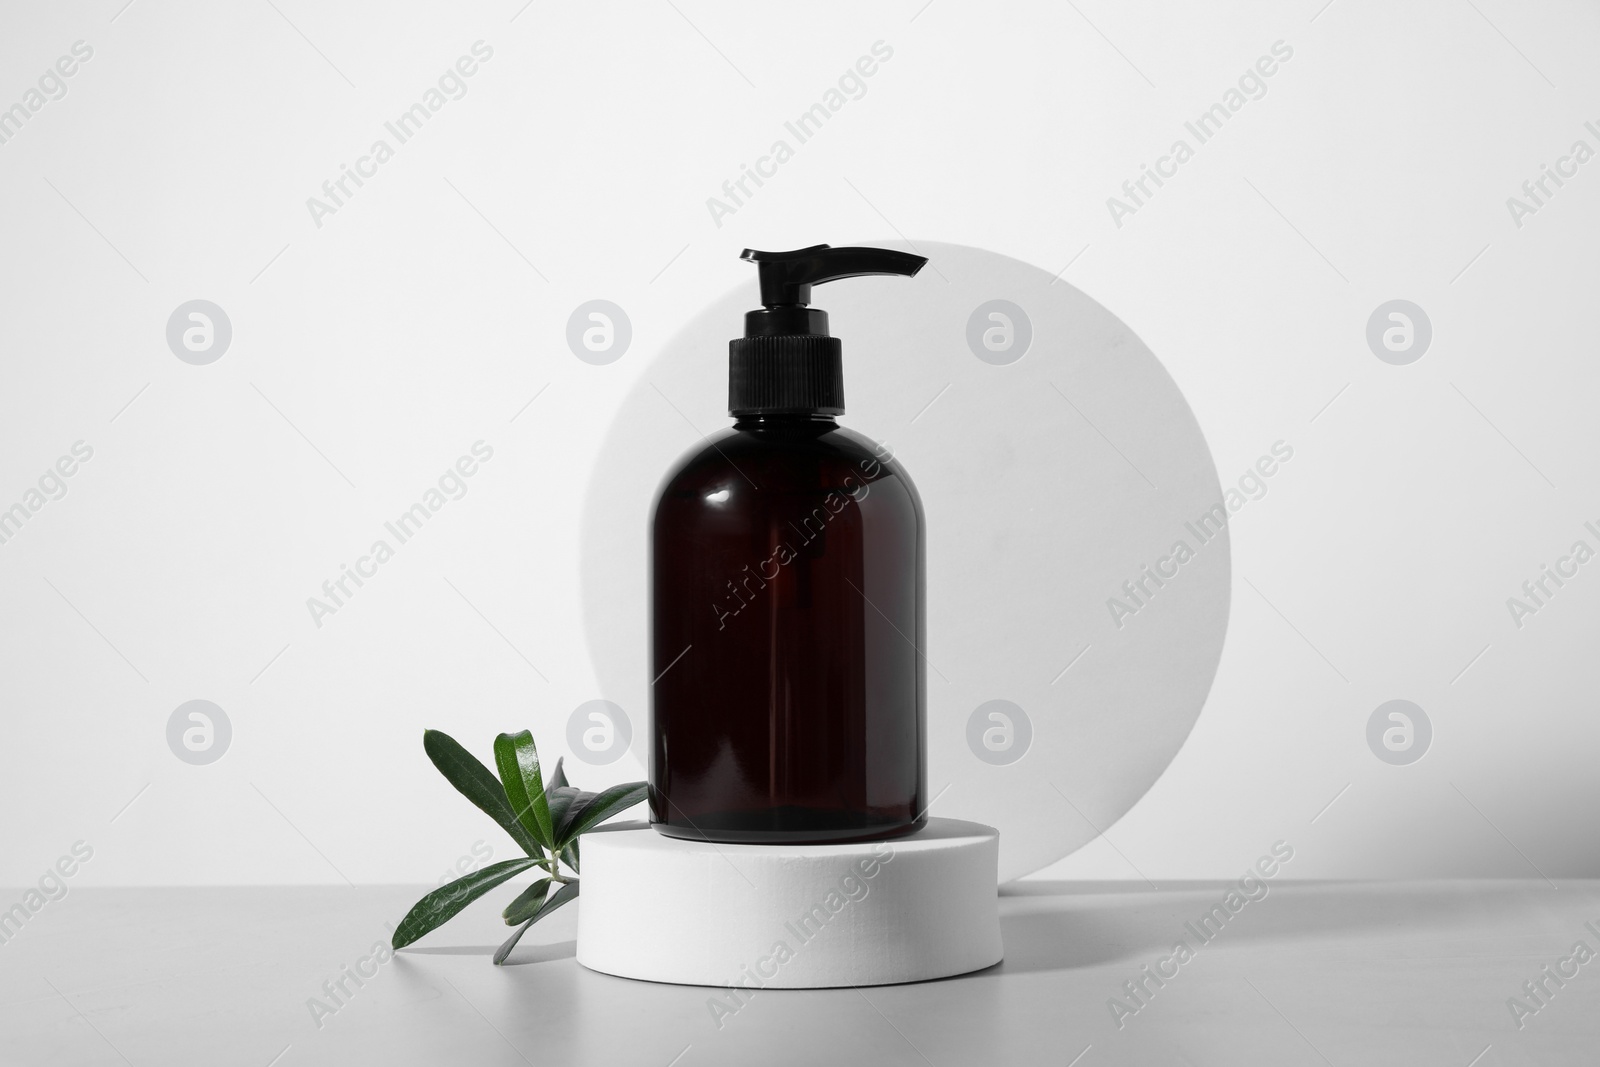 Photo of Bottle of cosmetic product and green leaves on light grey table against white background